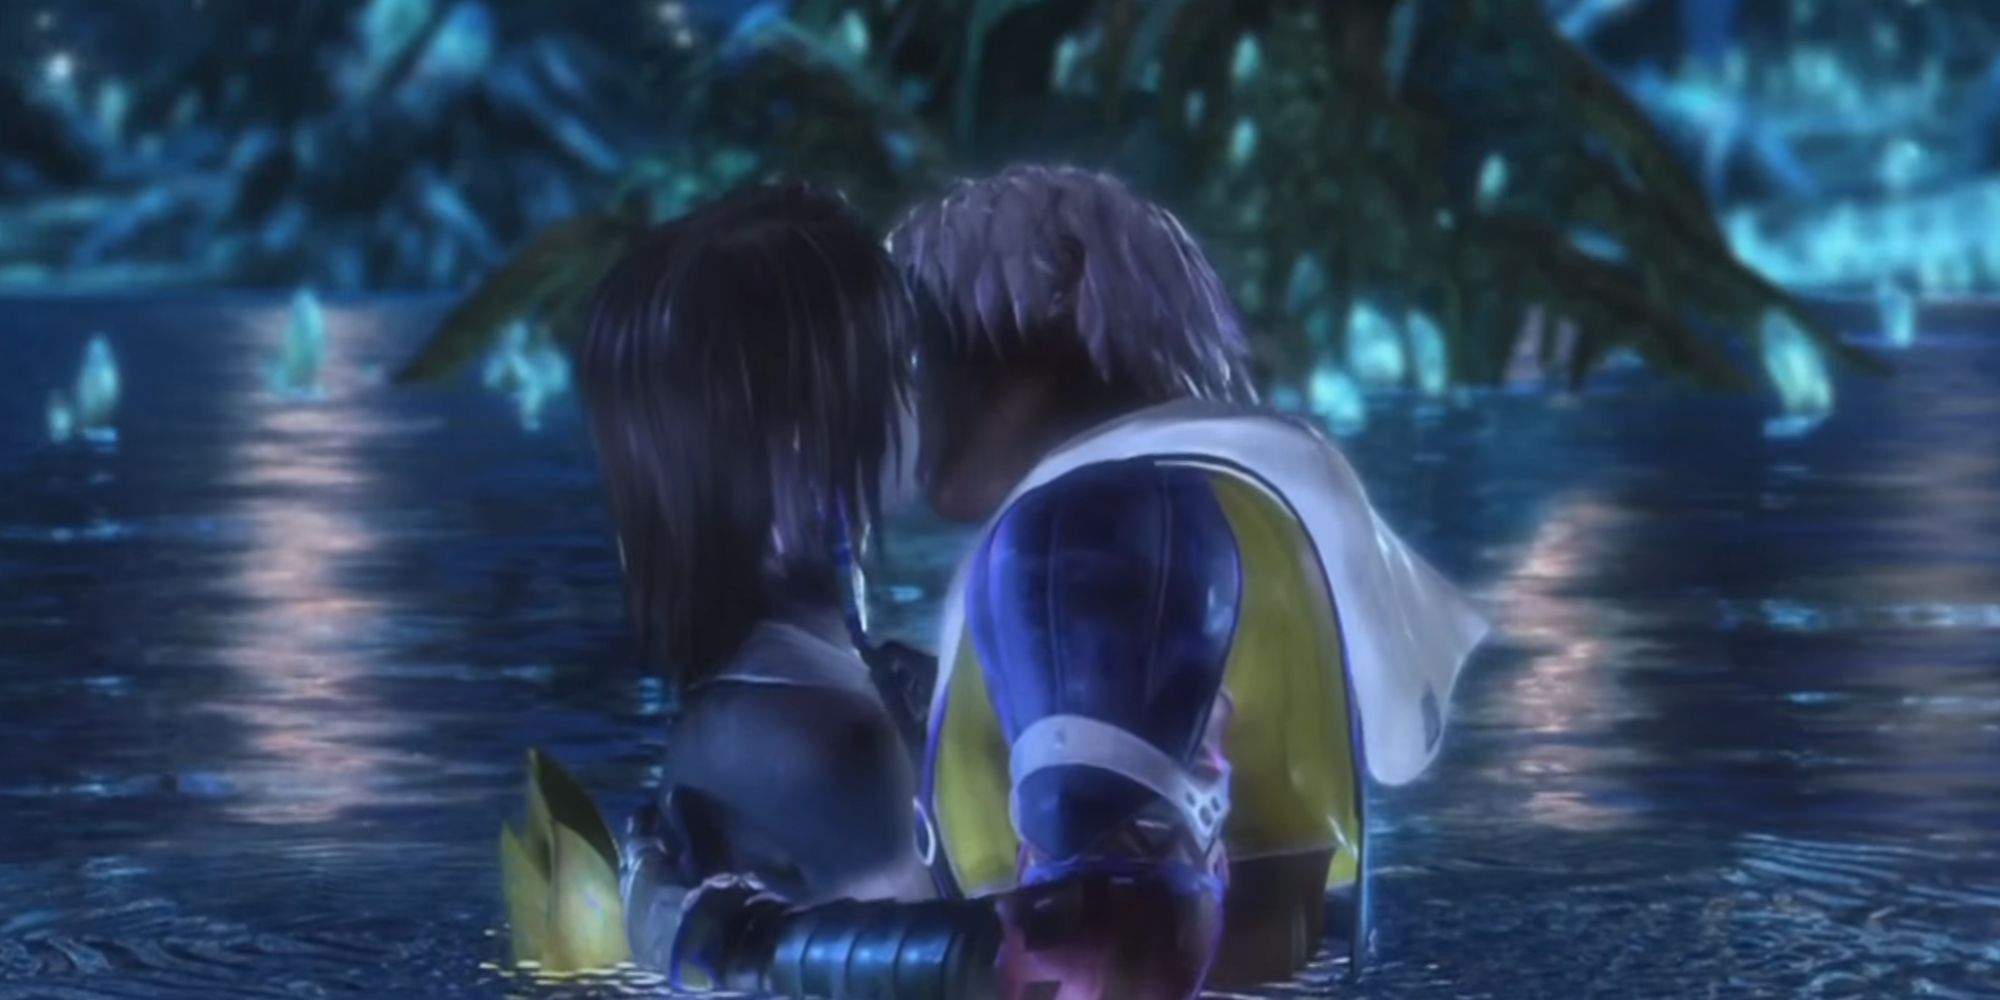 Yuna and Tidus as they kiss in Final Fantasy X